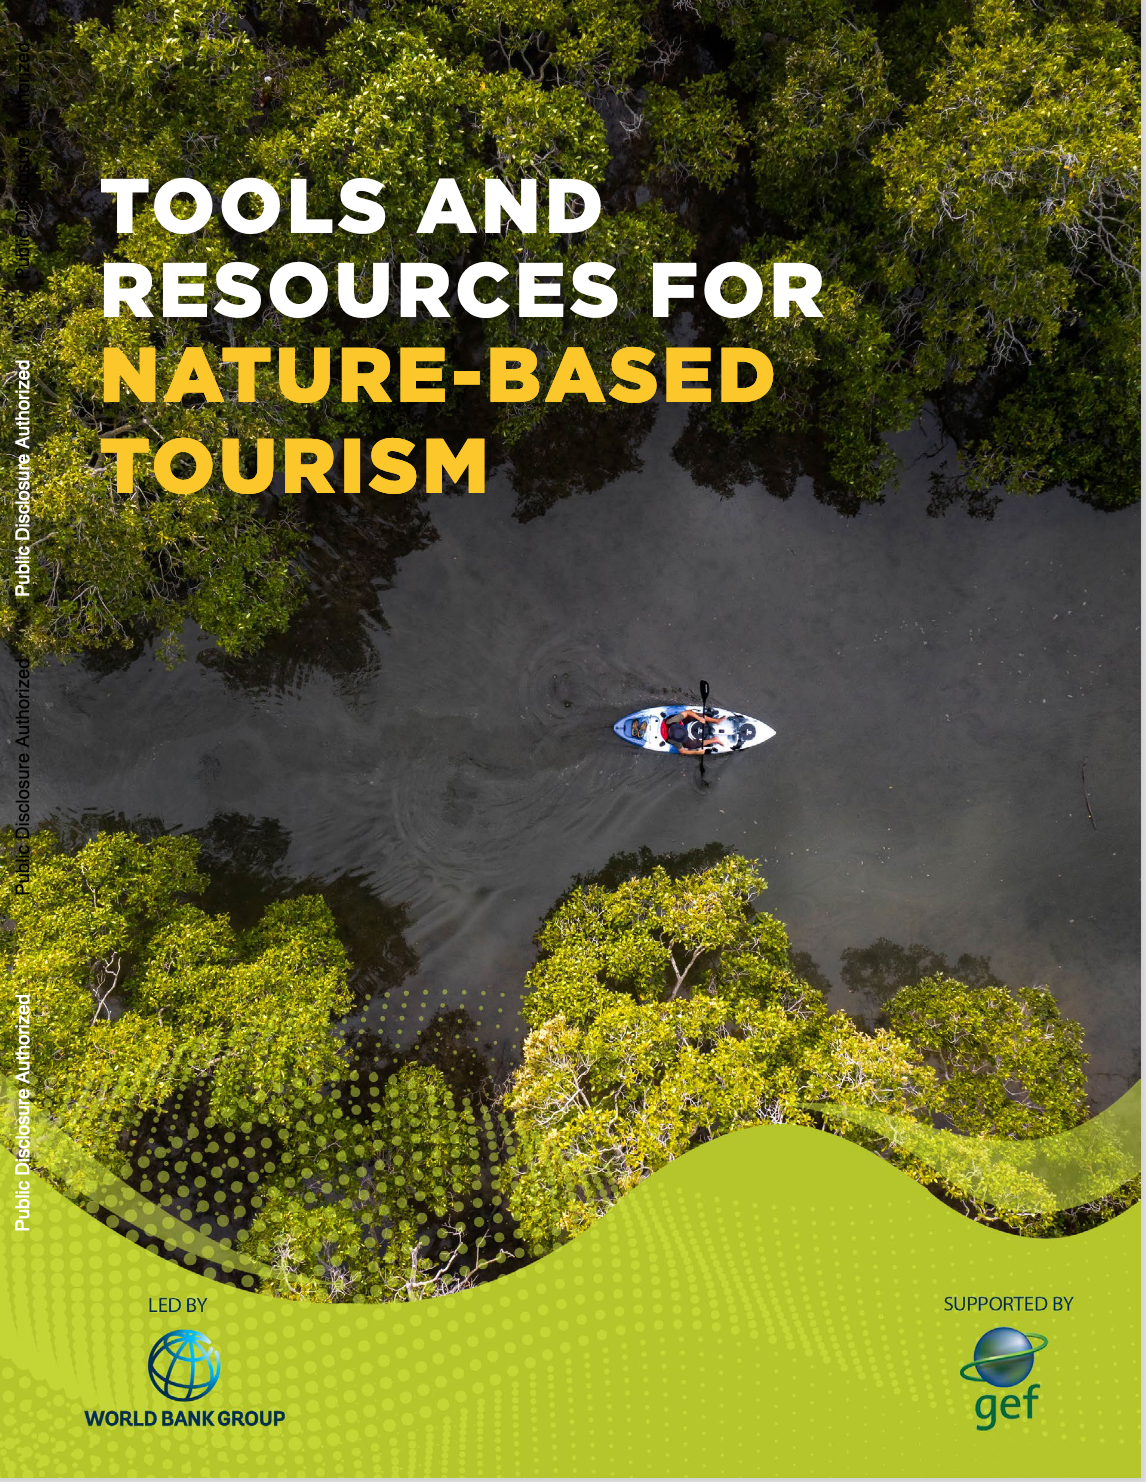 nature based tourism resources